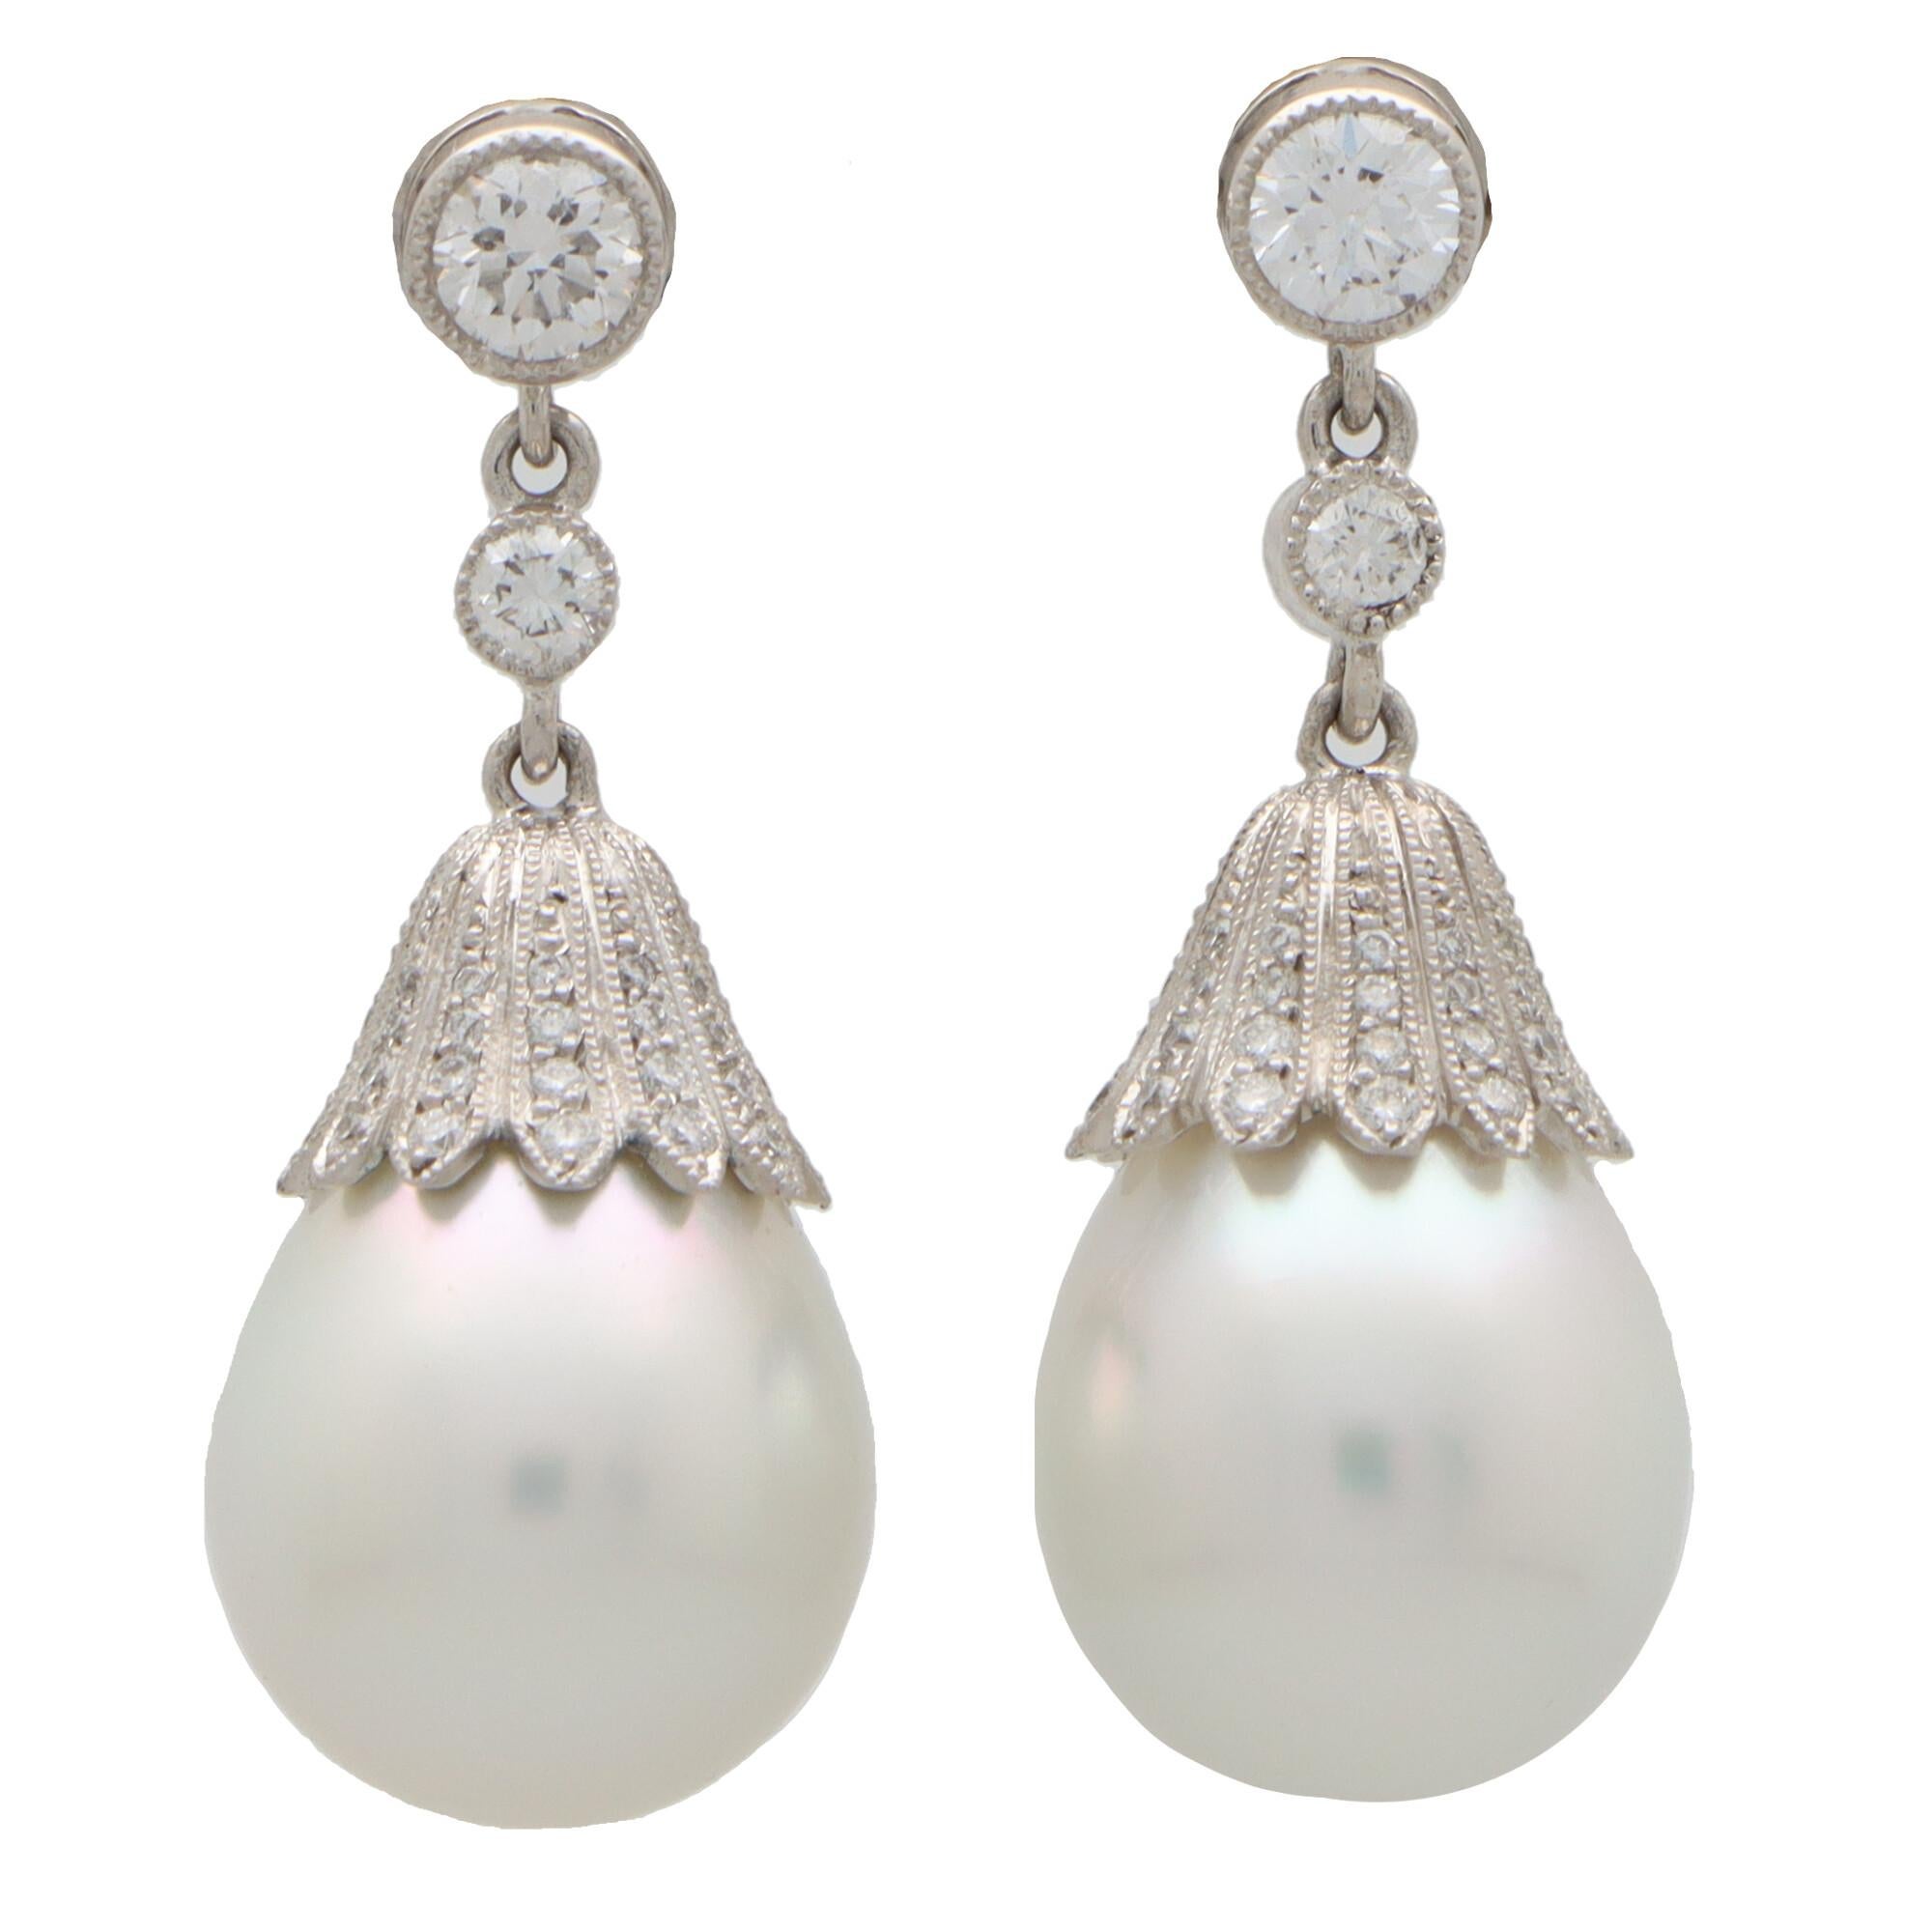 Round Cut Art Deco Inspired Pearl and Diamond Drop Earrings in 18k White Gold